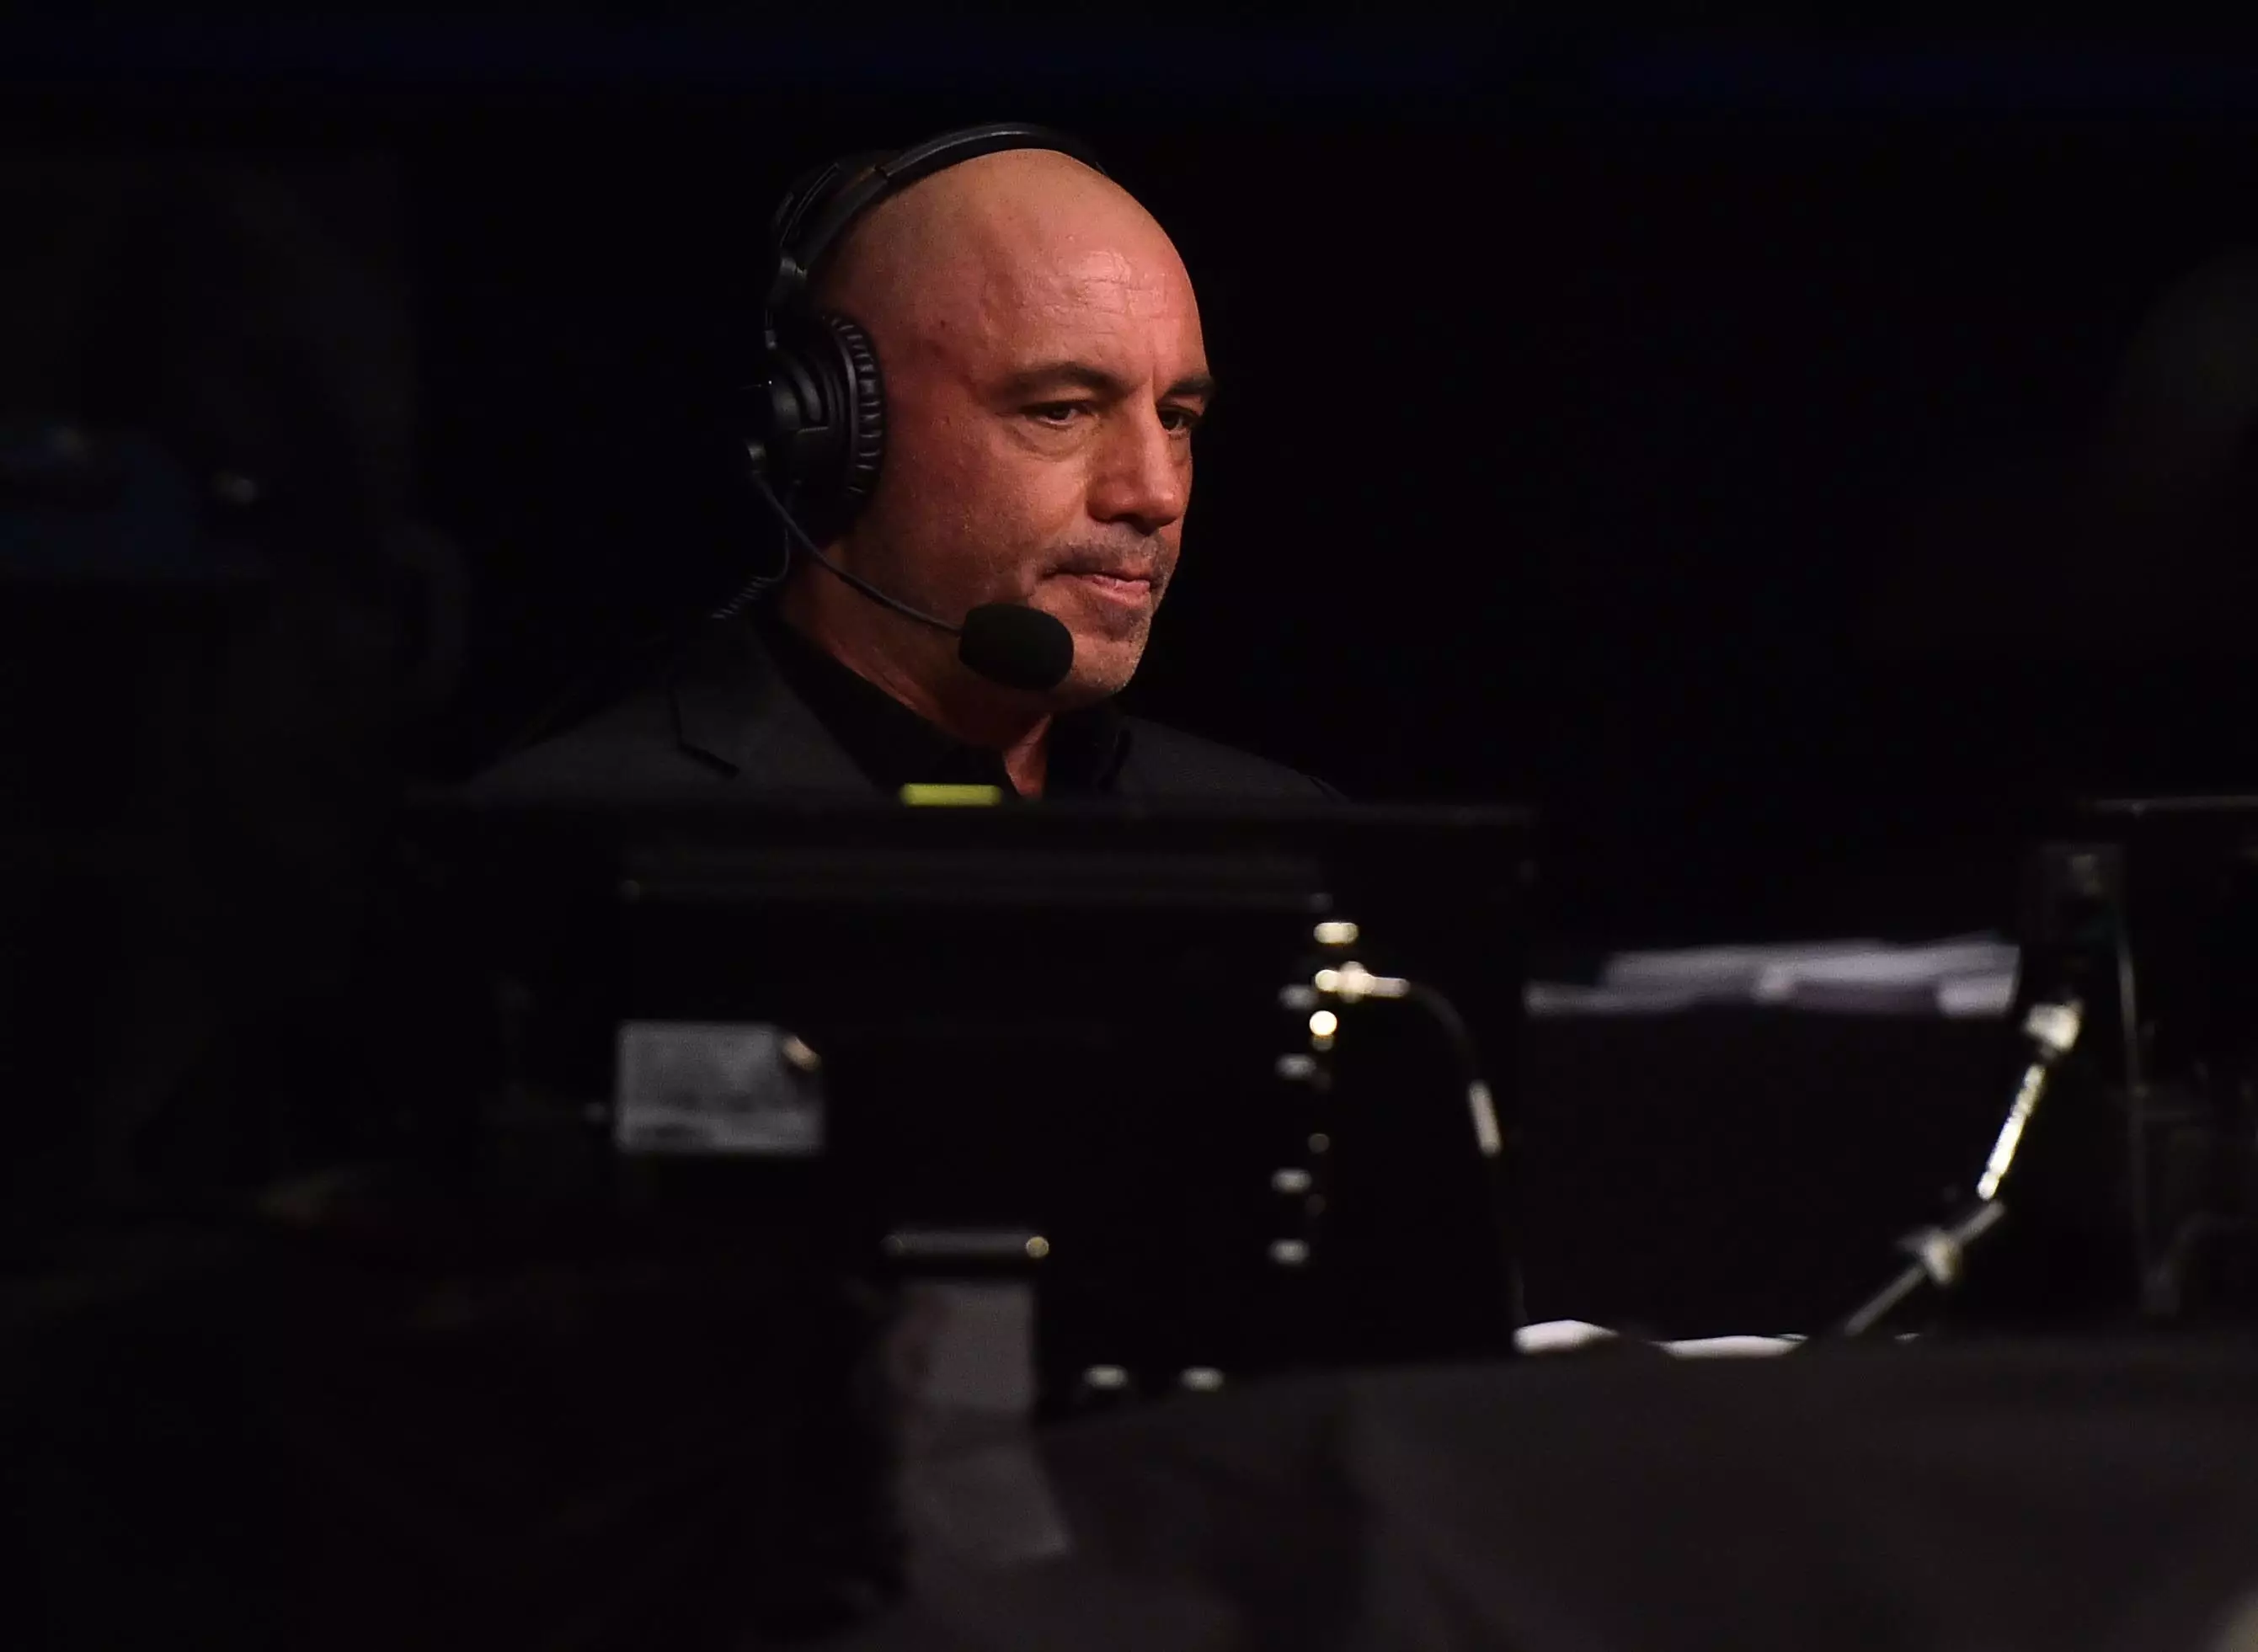 Joe Rogan has signed an exclusive deal with Spotify.